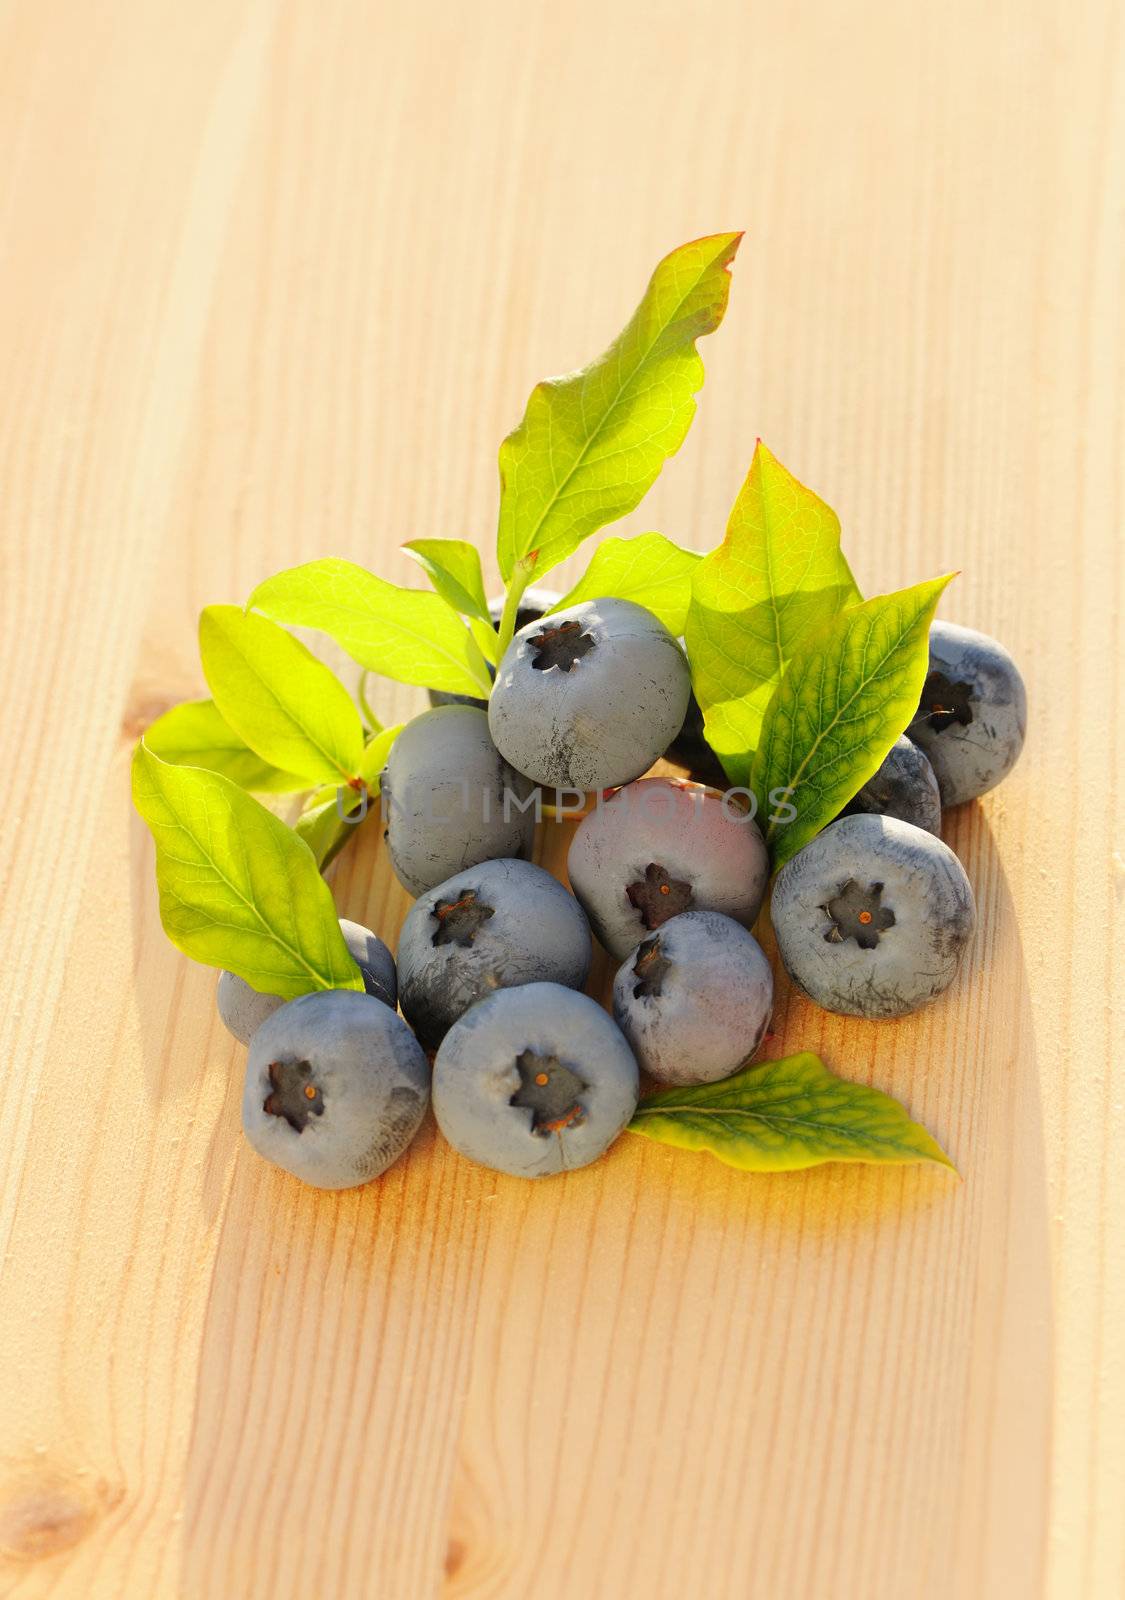 Blueberry with leafs on wooden table